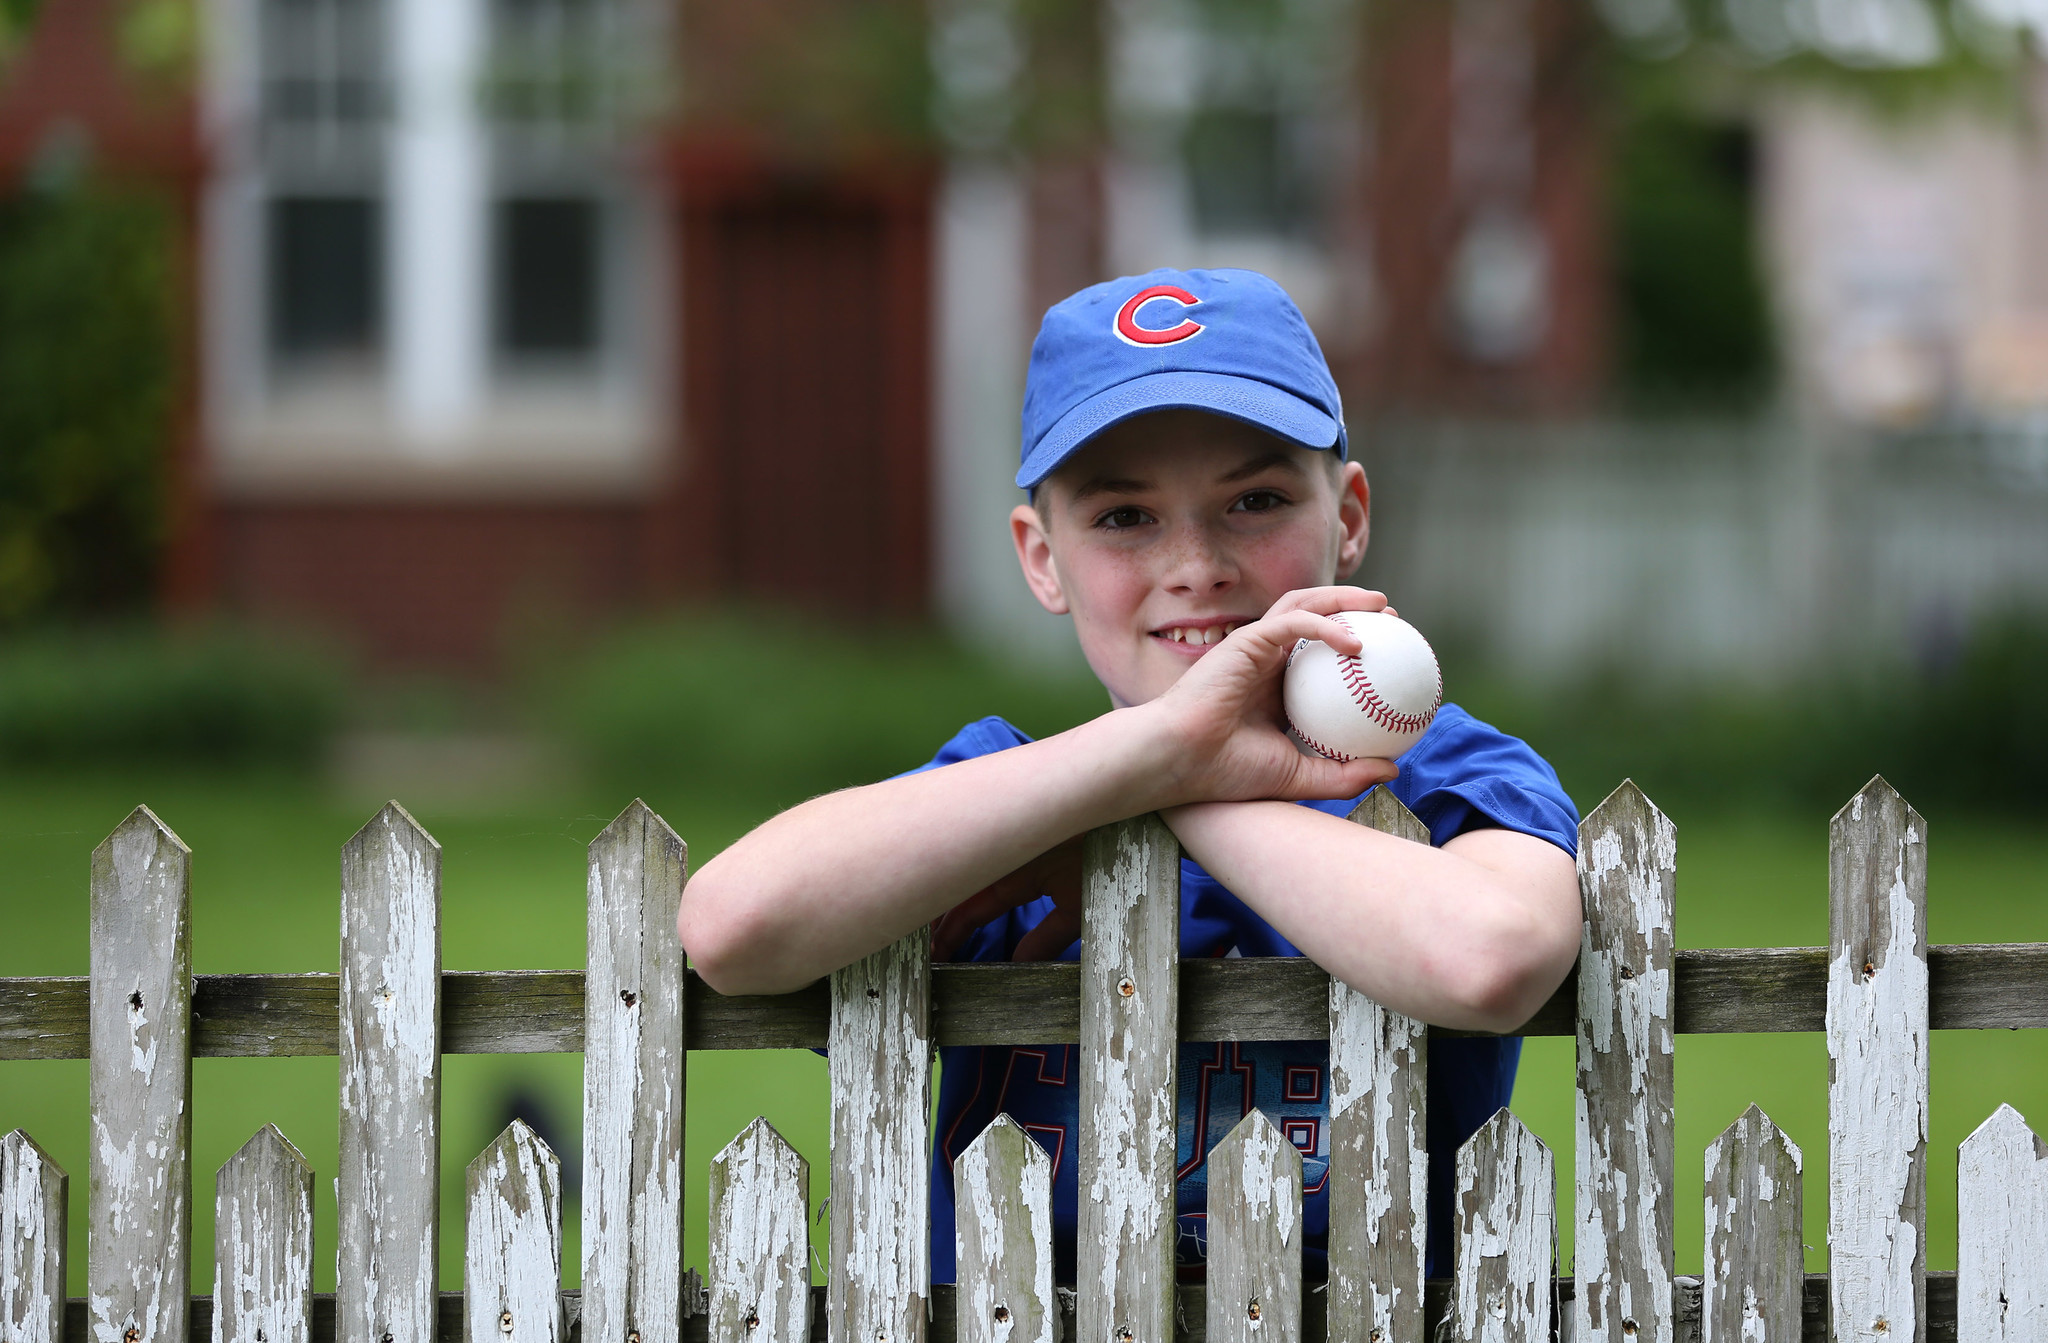 Boy who played catch with Cubs' Willson Contreras cherishes memory